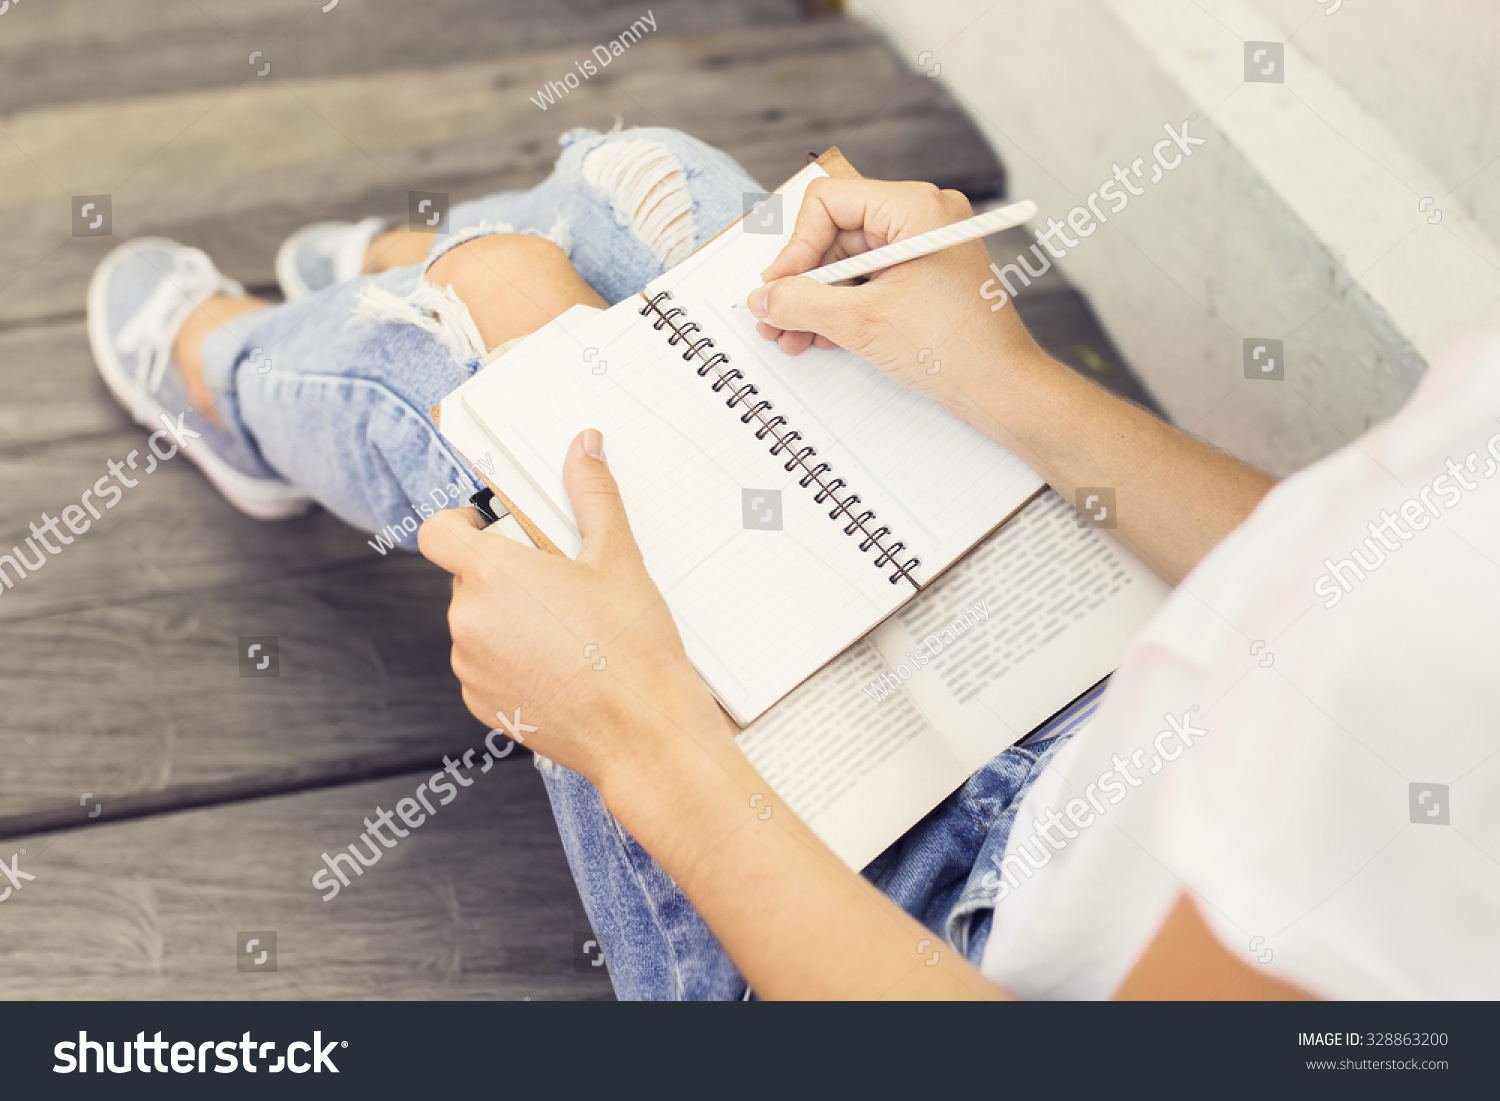 Girl making notes in the diary #328863200